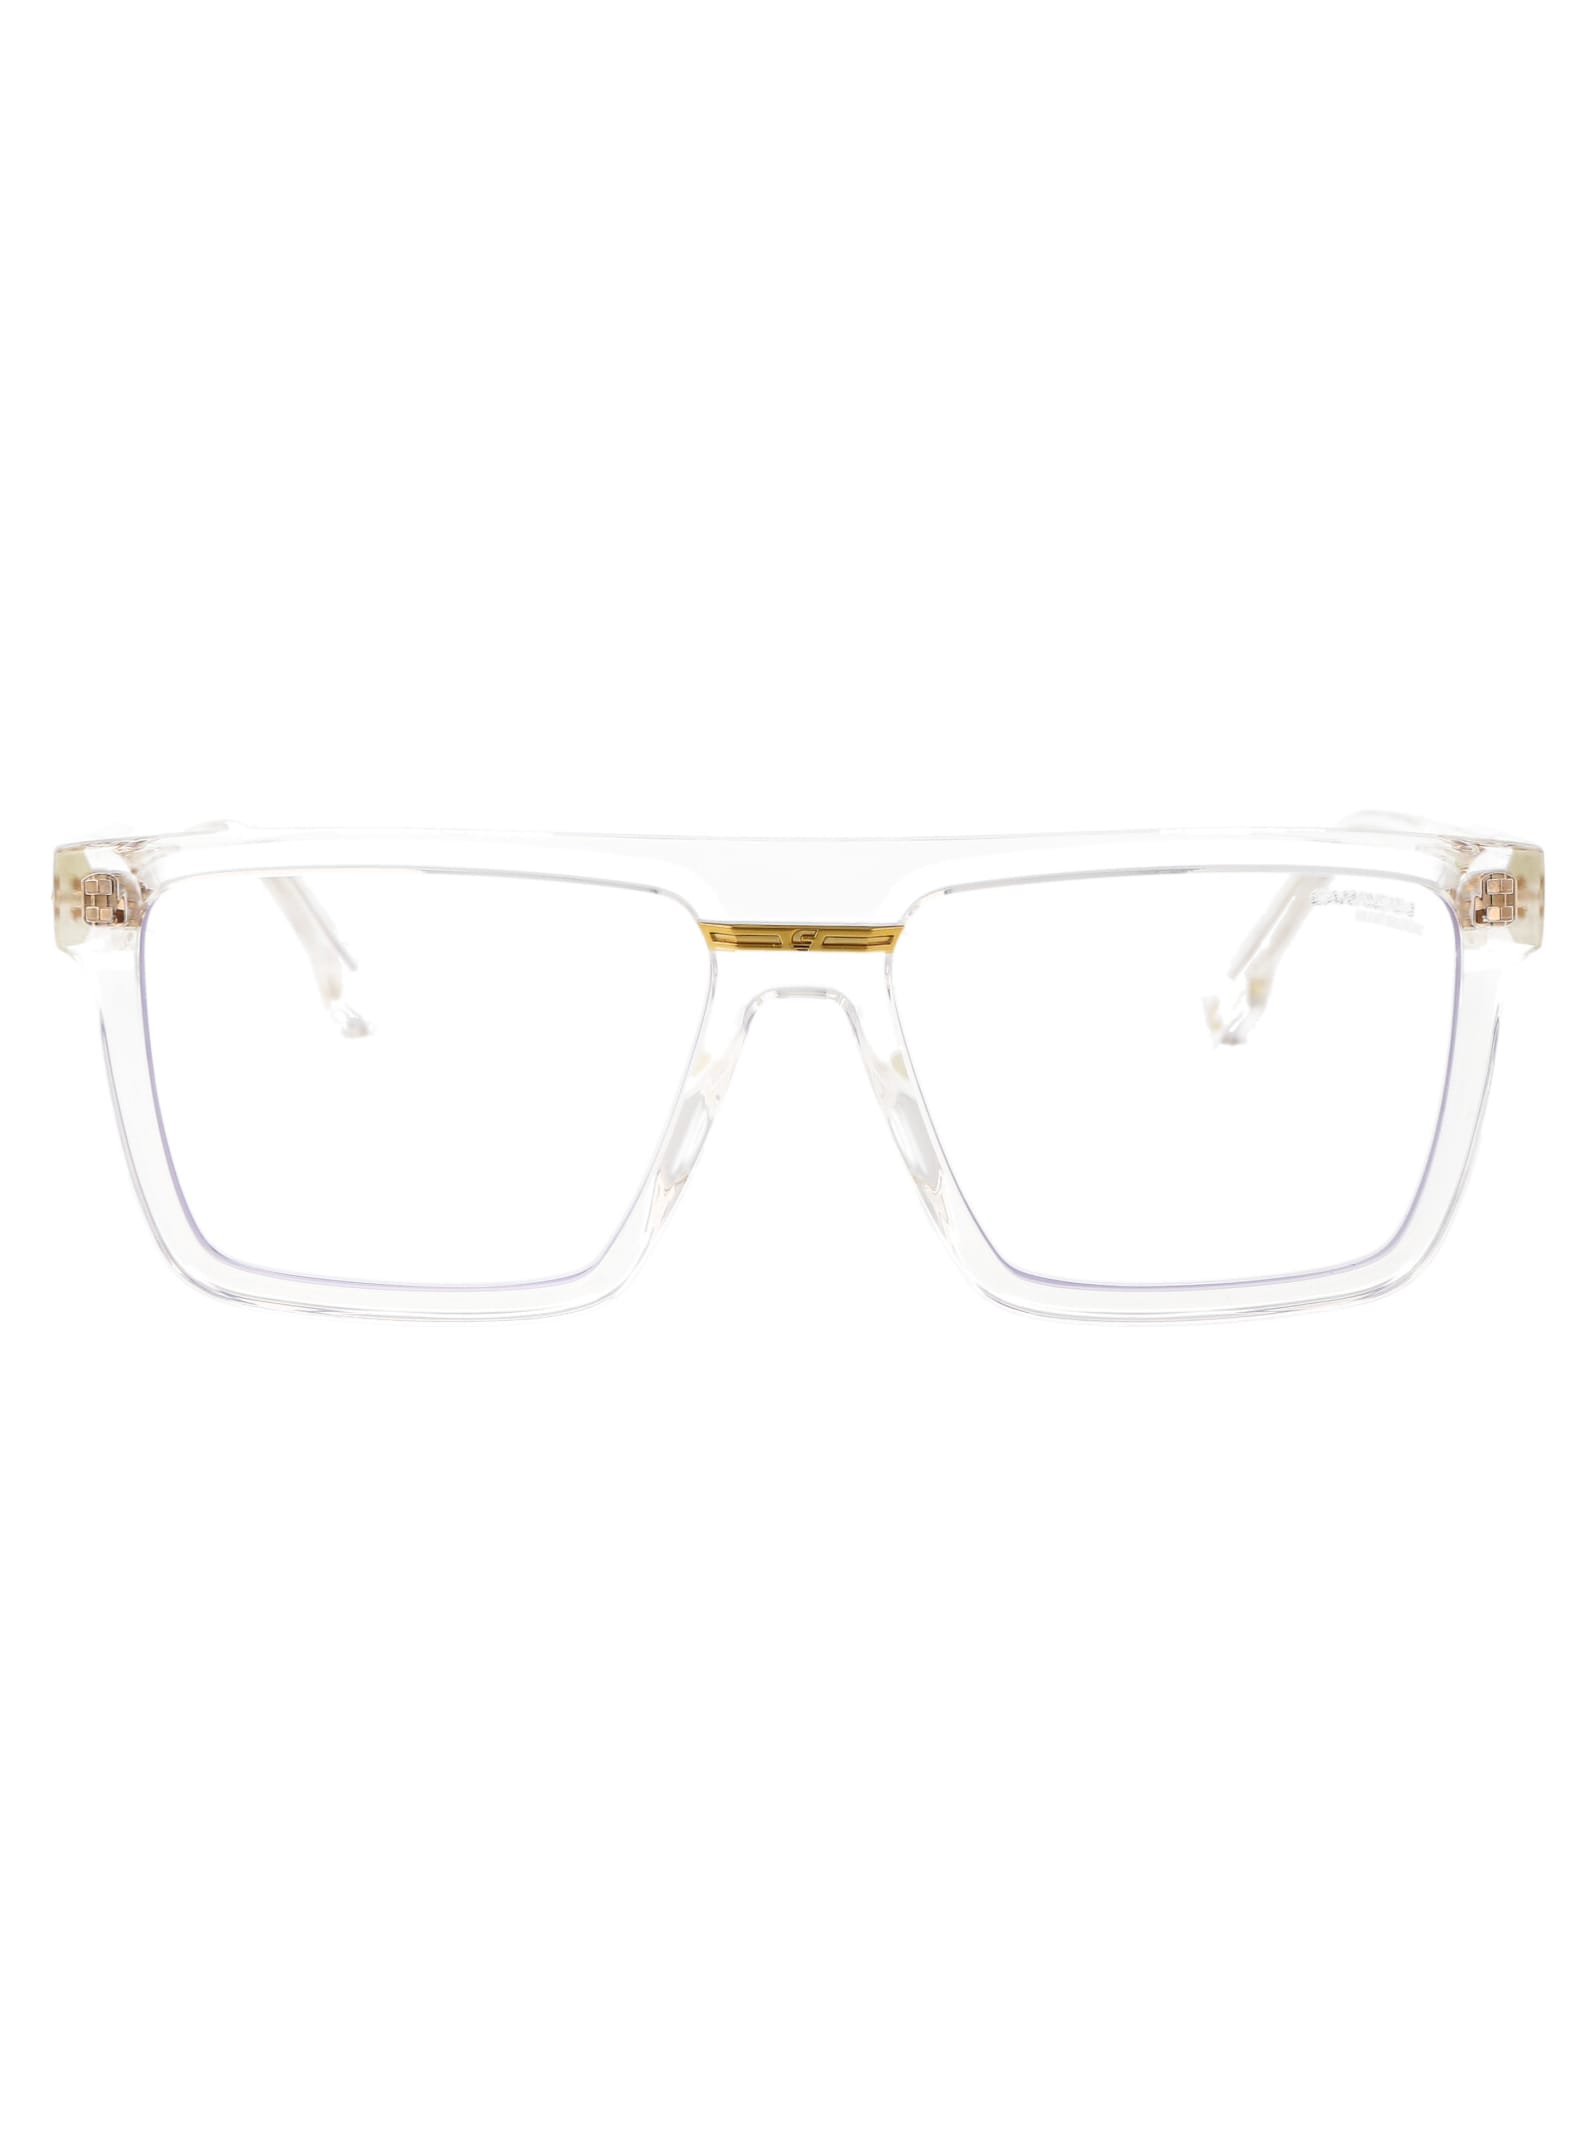 Carrera Victory C 03/bb Glasses In Rej Crys Gold